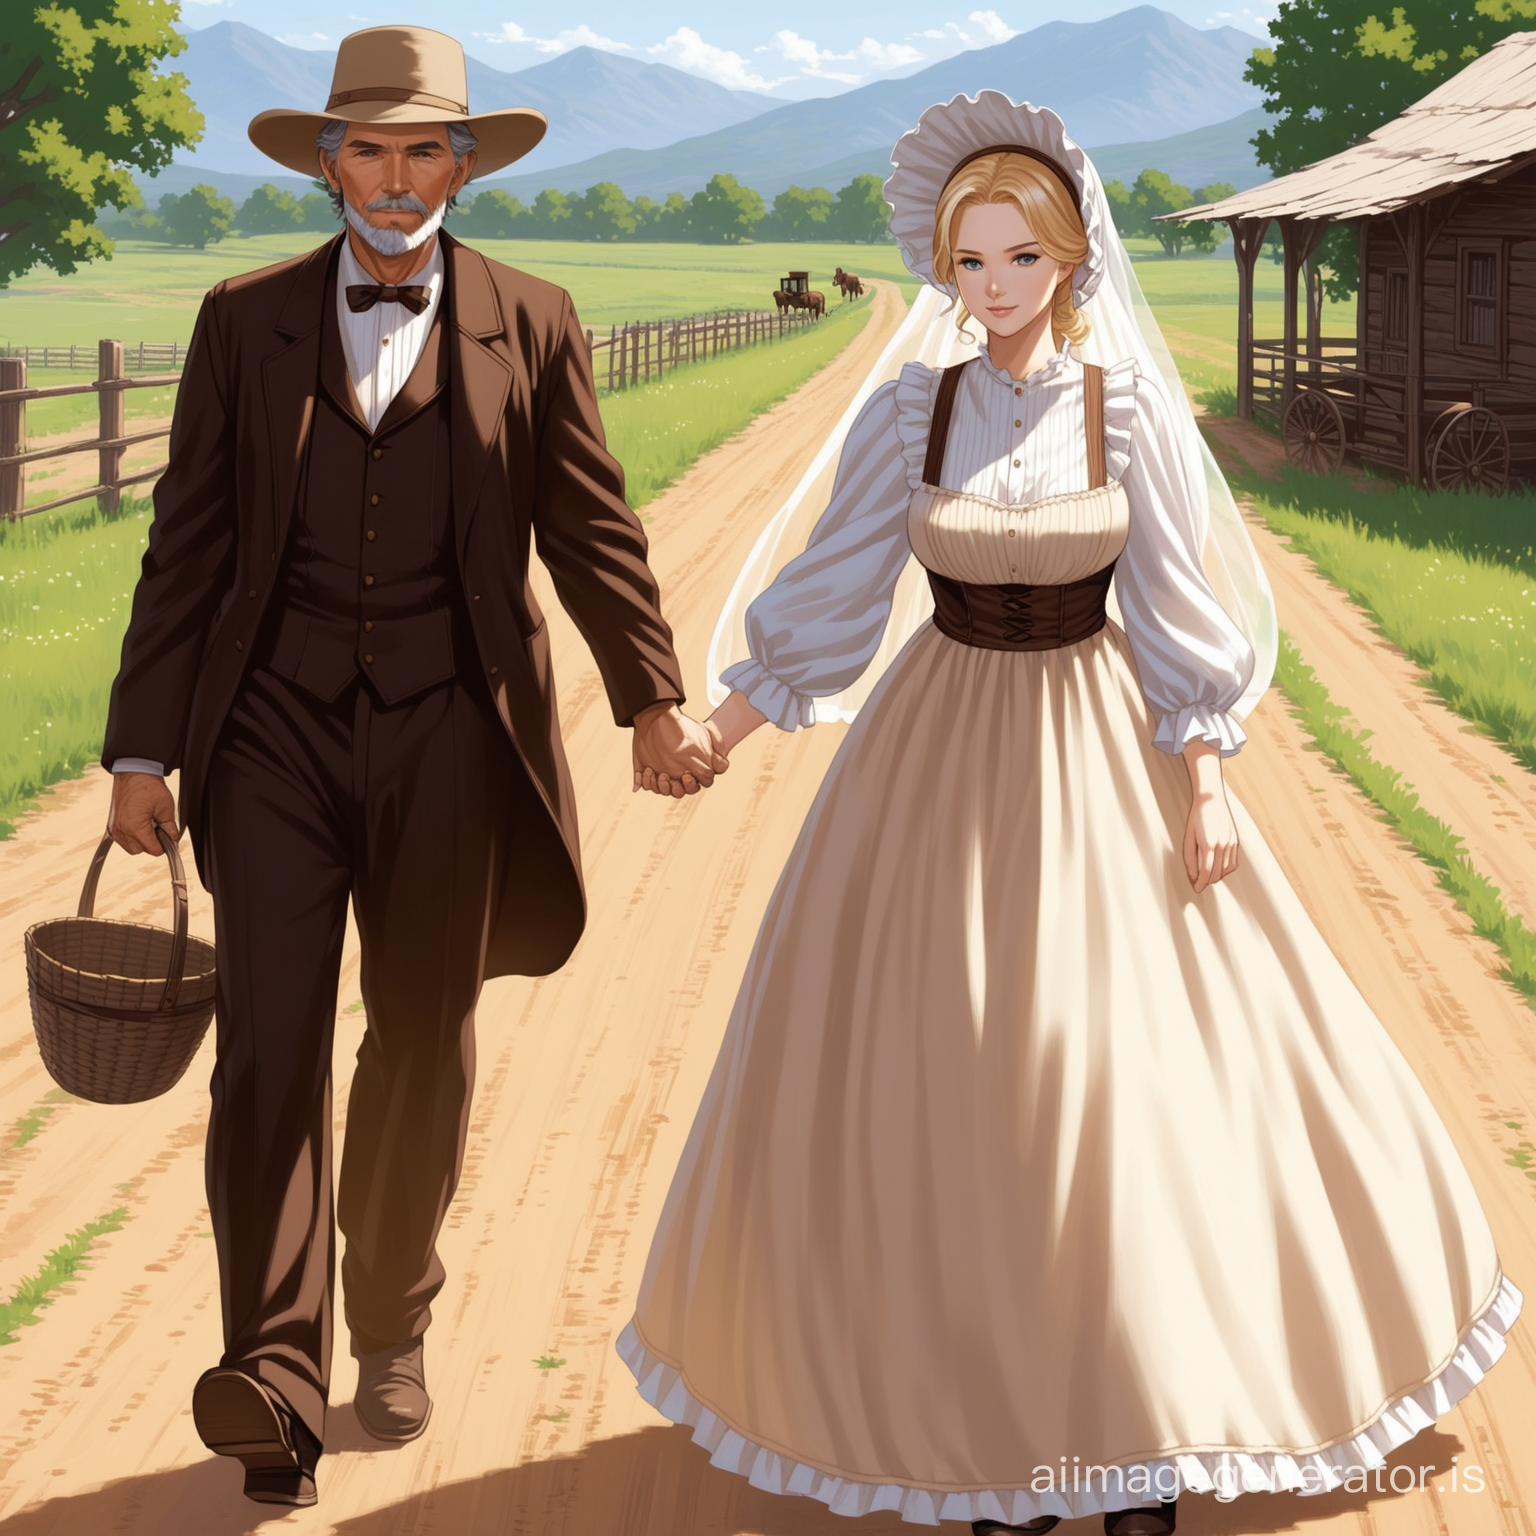 Susan Storm from the FF4 dressed as an old west farmer's wife wearing a brown floor-length loose billowing old west poofy modest dress with a long apron and a frilly bonnet hand in hand with an old farmer dressed into a black suit who seems to be her newlywed husband